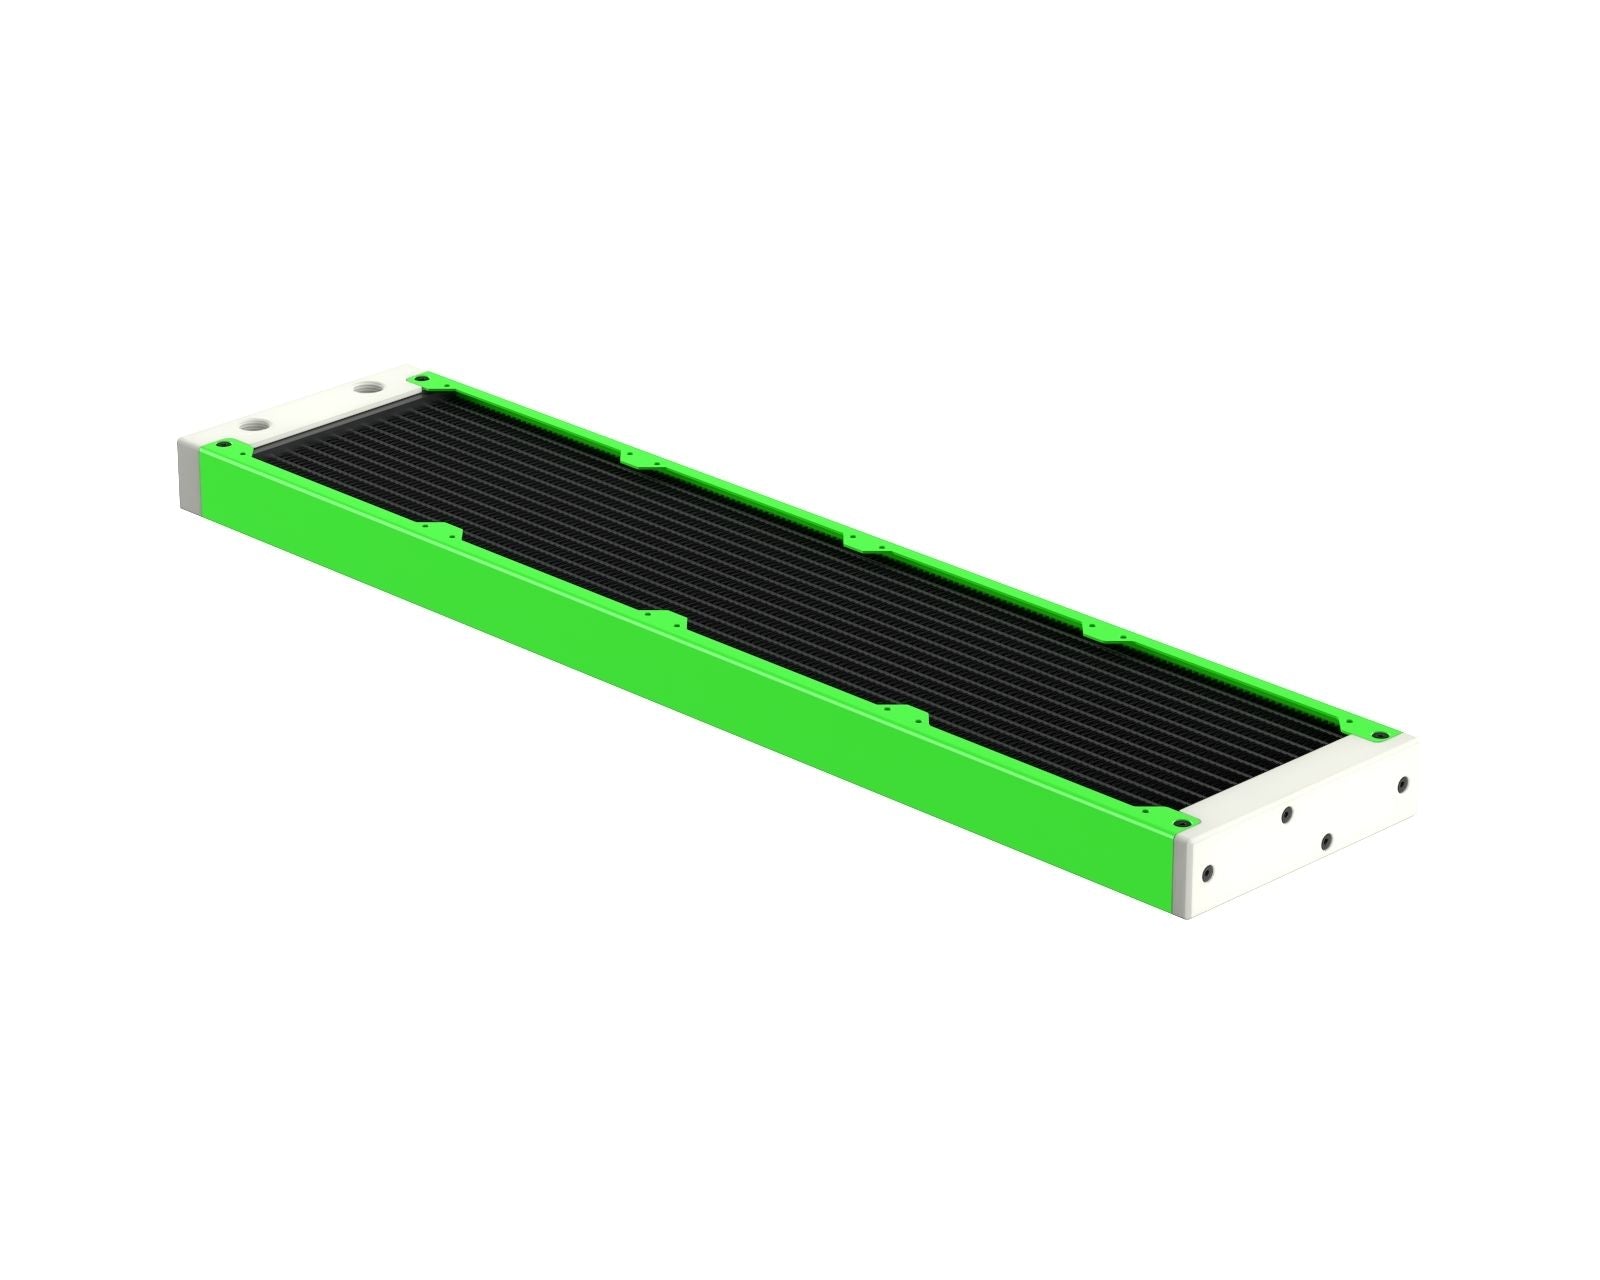 PrimoChill 480SL (30mm) EXIMO Modular Radiator, White POM, 4x120mm, Quad Fan (R-SL-W48) Available in 20+ Colors, Assembled in USA and Custom Watercooling Loop Ready - UV Green